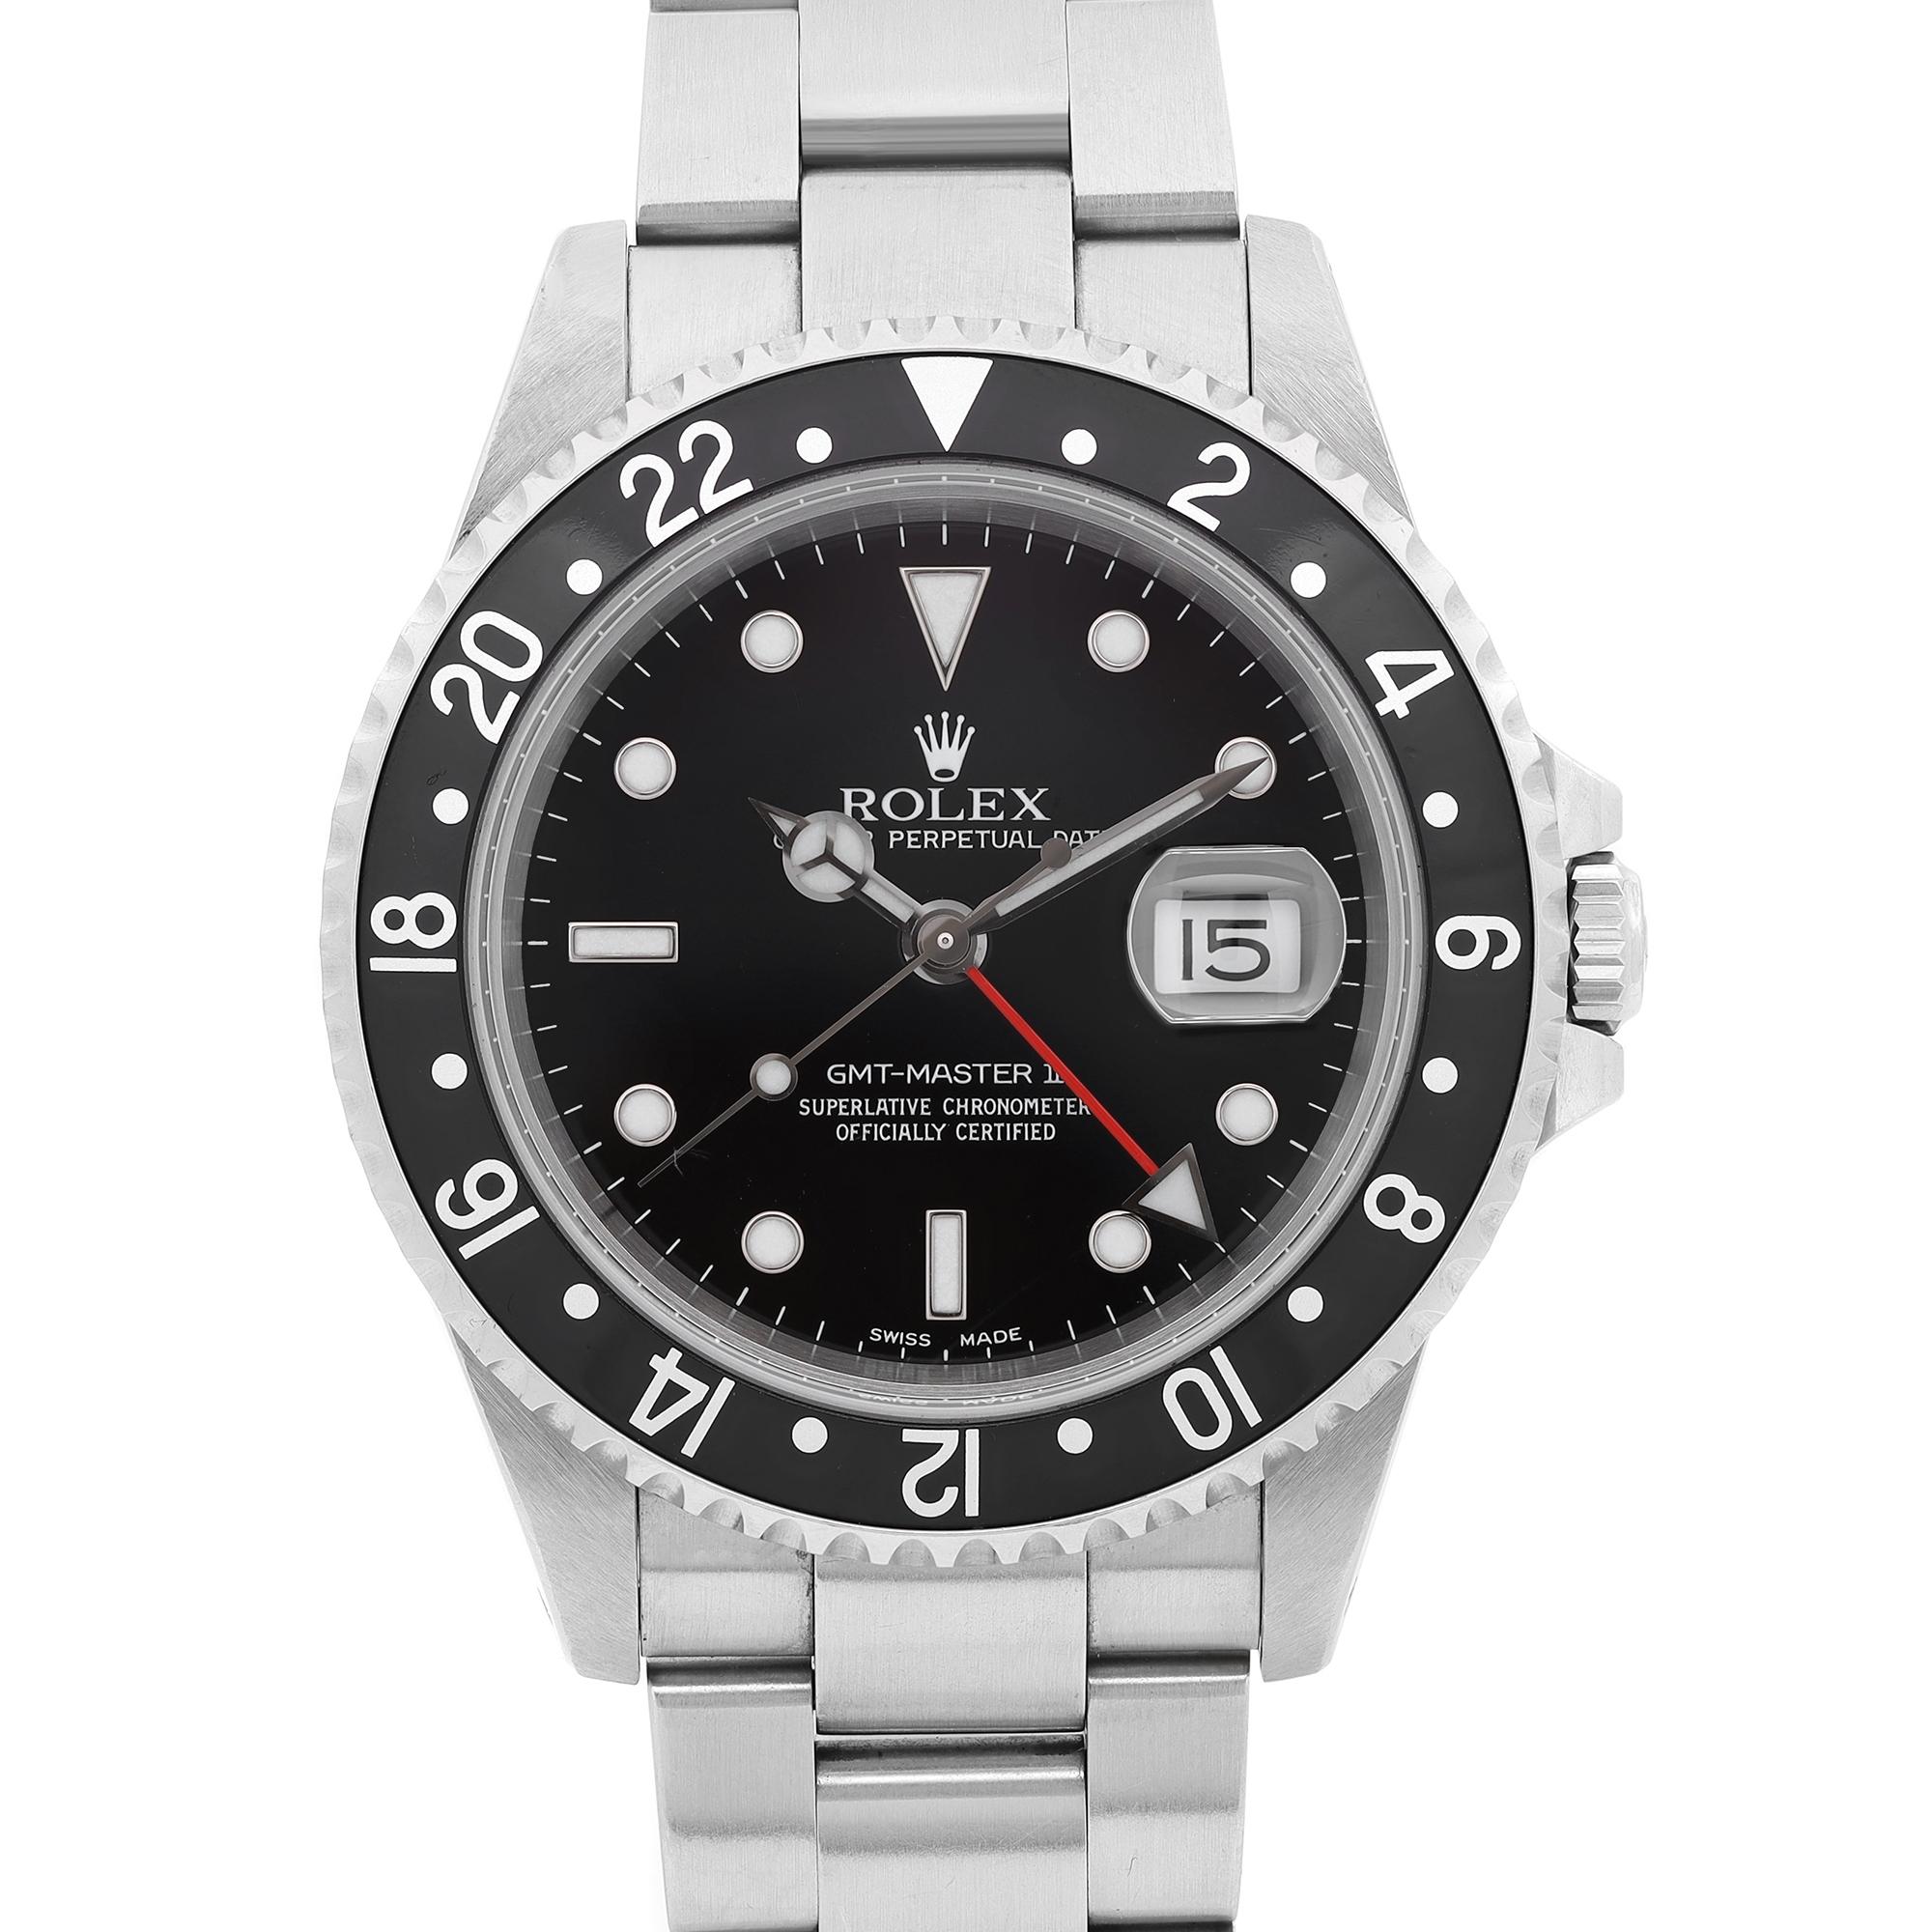 Pre-owned. This watch was produced in 2001. Minor nicks and scratches on the bezel insert. Recently serviced.
Brand: Rolex  Type: Wristwatch  Department: Men  Model Number: 16710  Country/Region of Manufacture: Switzerland  Style: Luxury  Model: